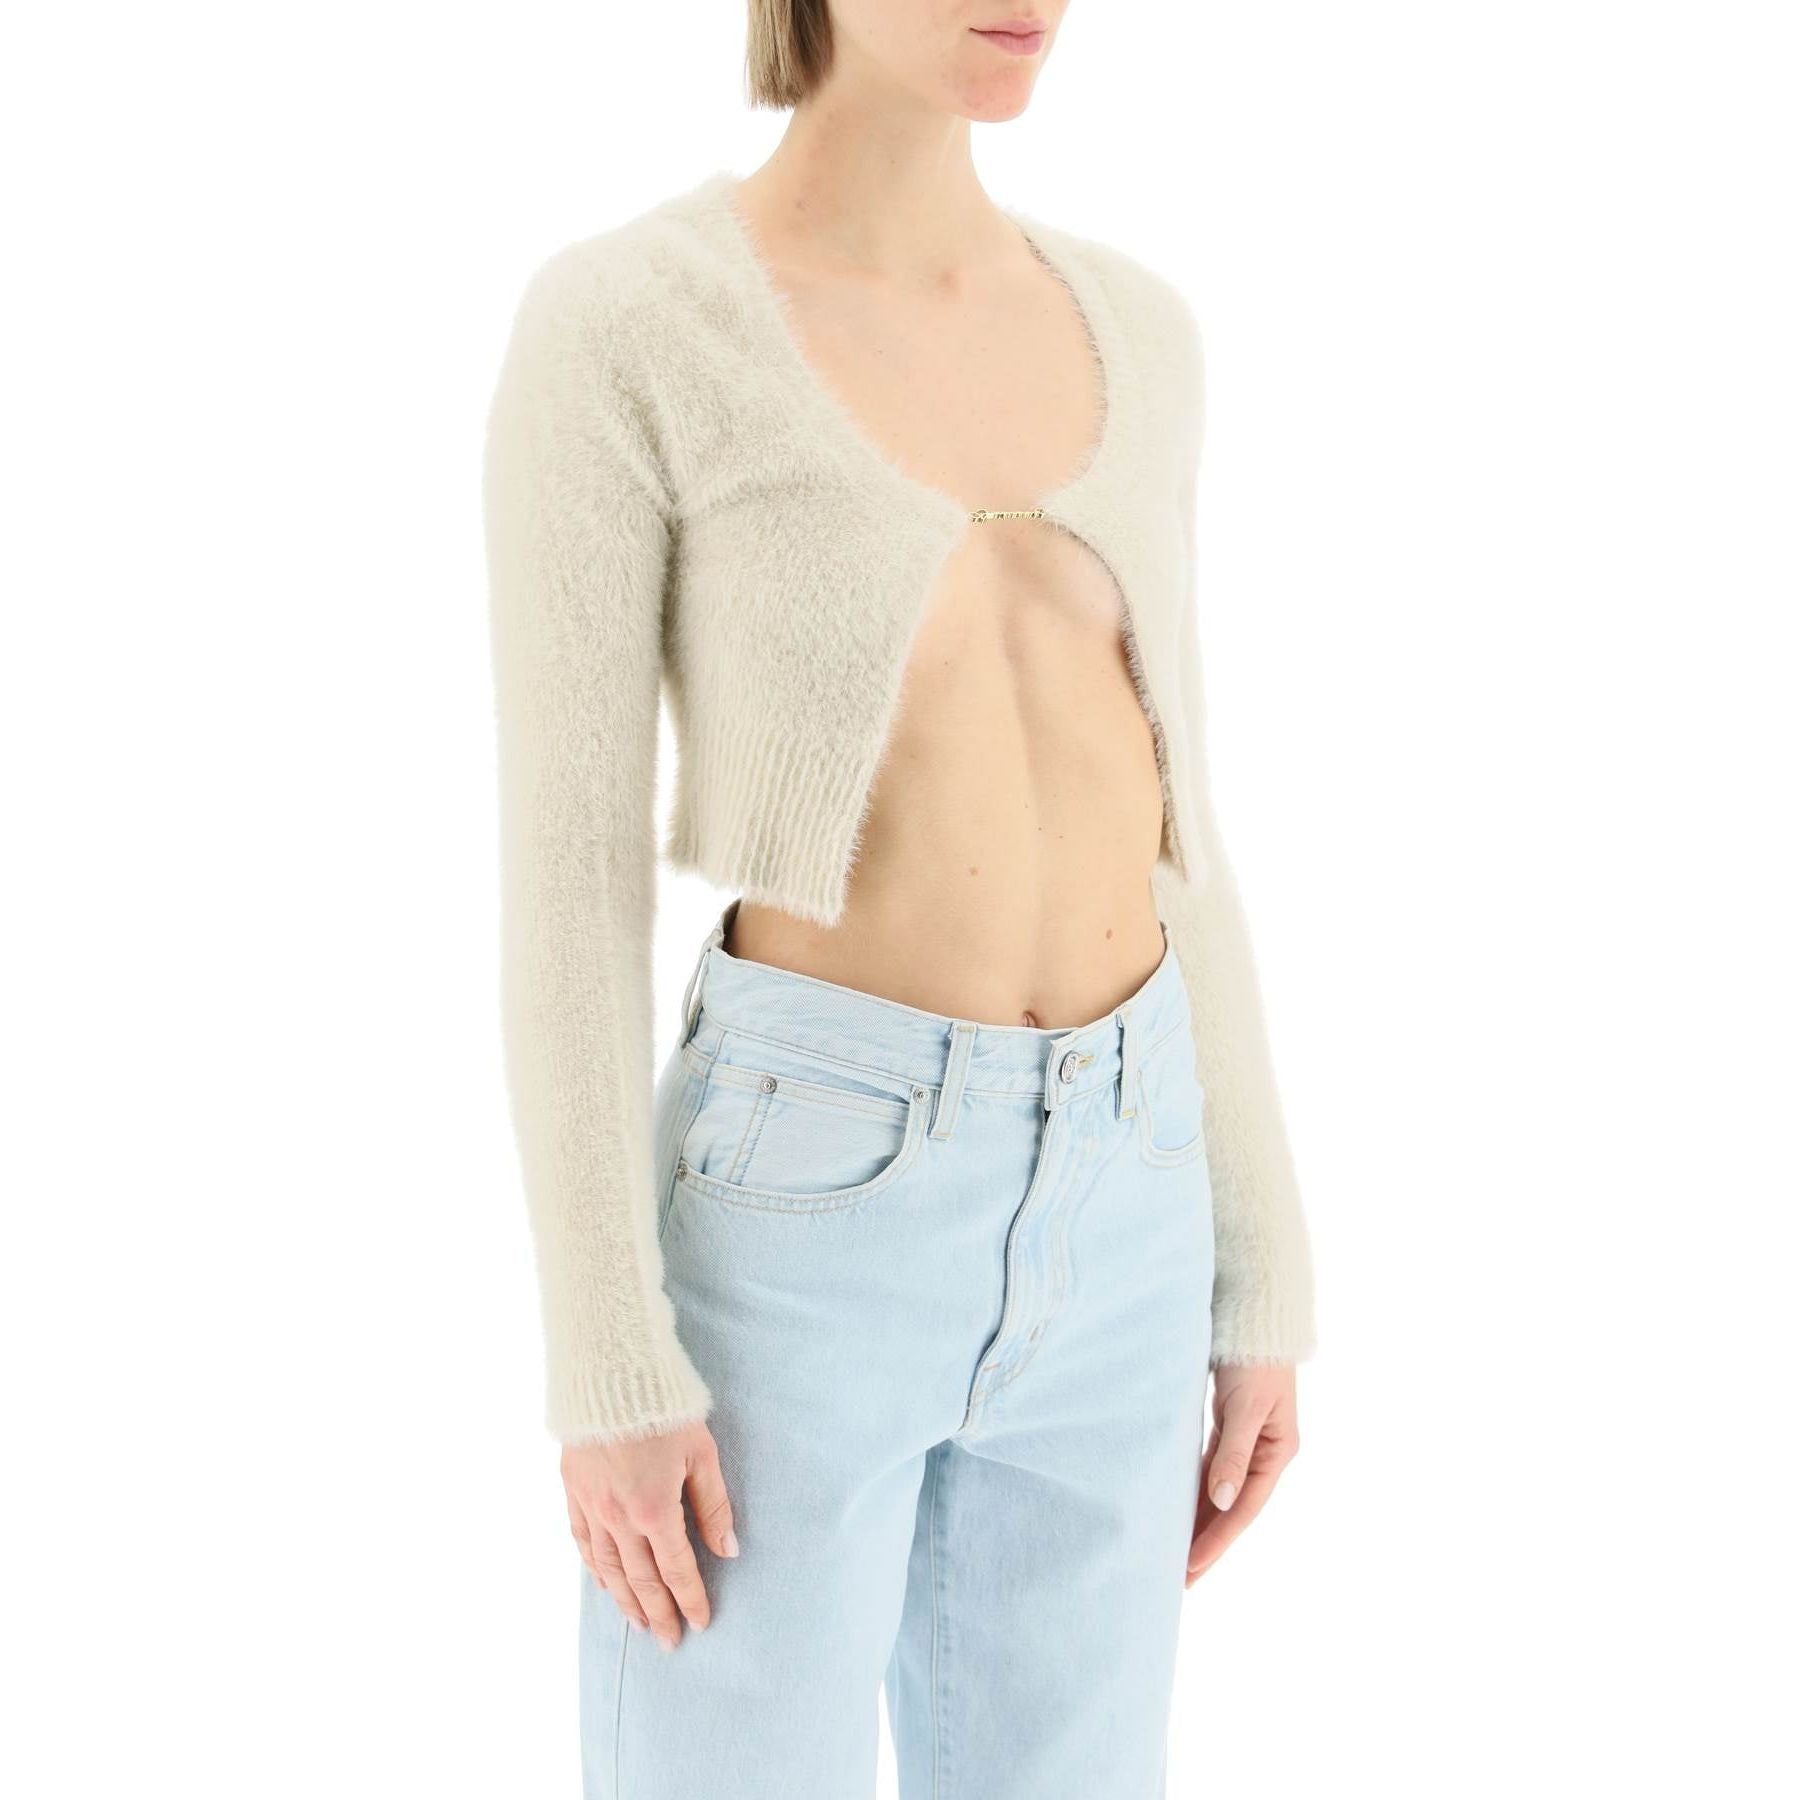 La Maille Neve Cropped Top